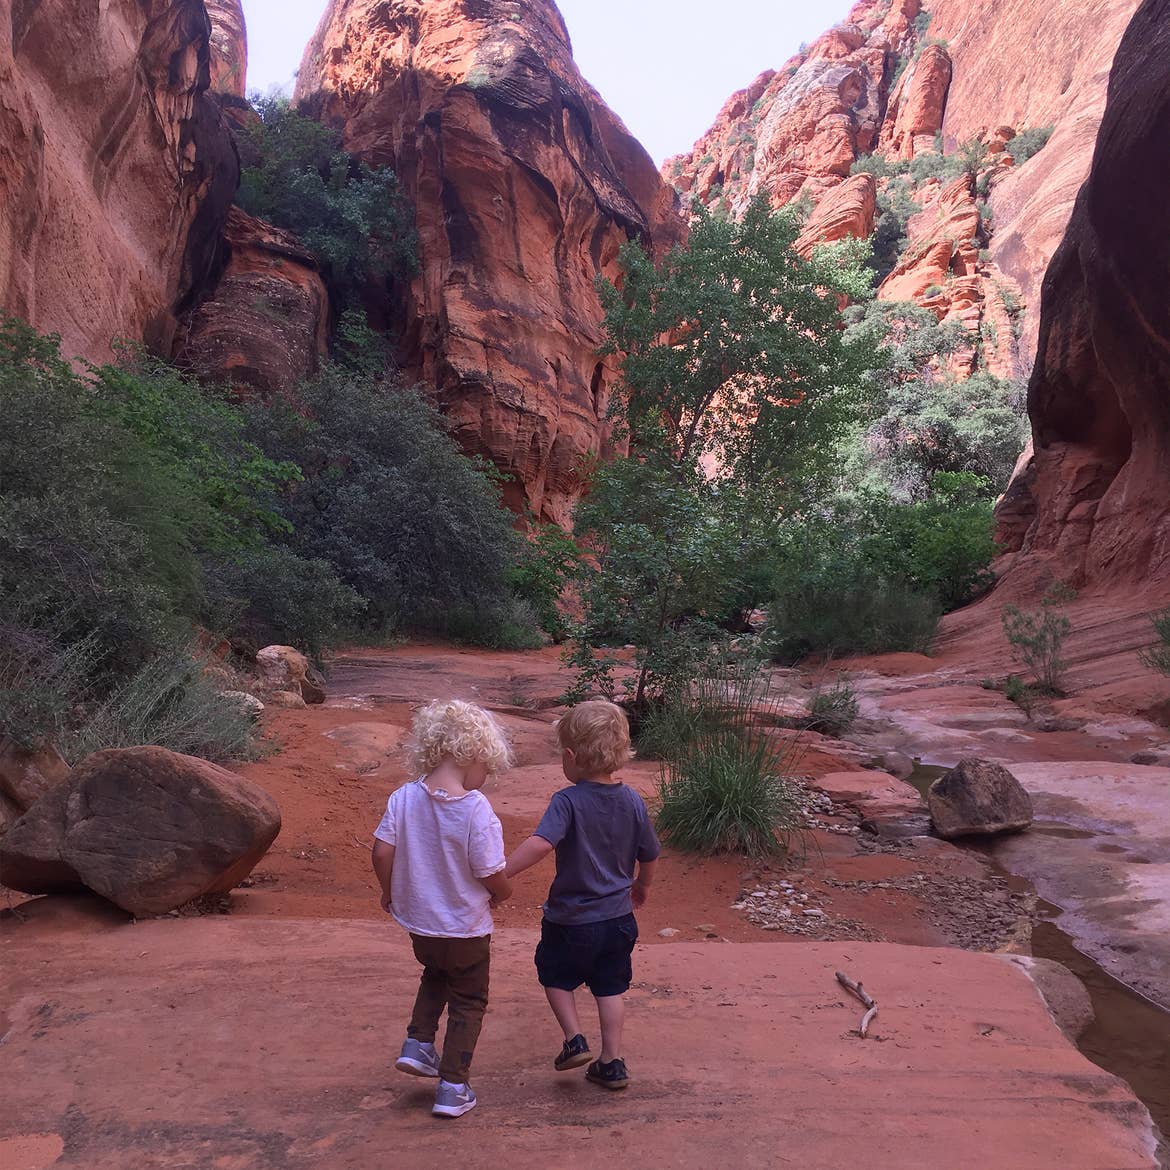 Two toddlers face giant, red rock formations with some green trees.